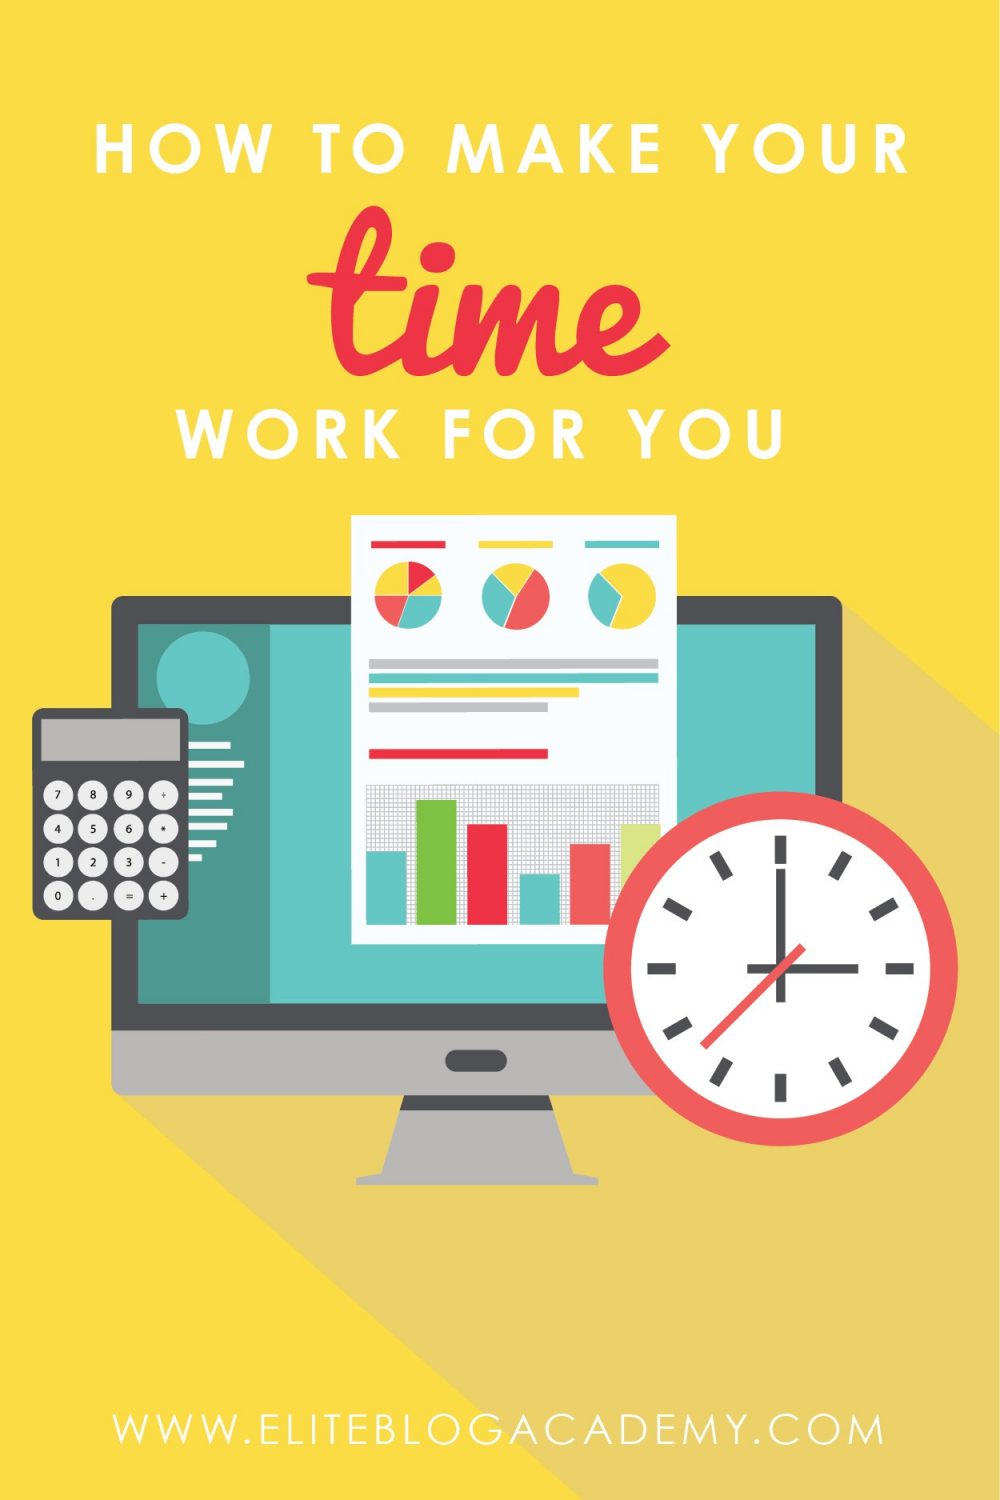 ROI, or Return on Investment, is a term we hear often in the blogging world. But how do you actually figure out your time ROI? These 4 easy steps will help you best understand how you're spending your time and how to make your time work for you!